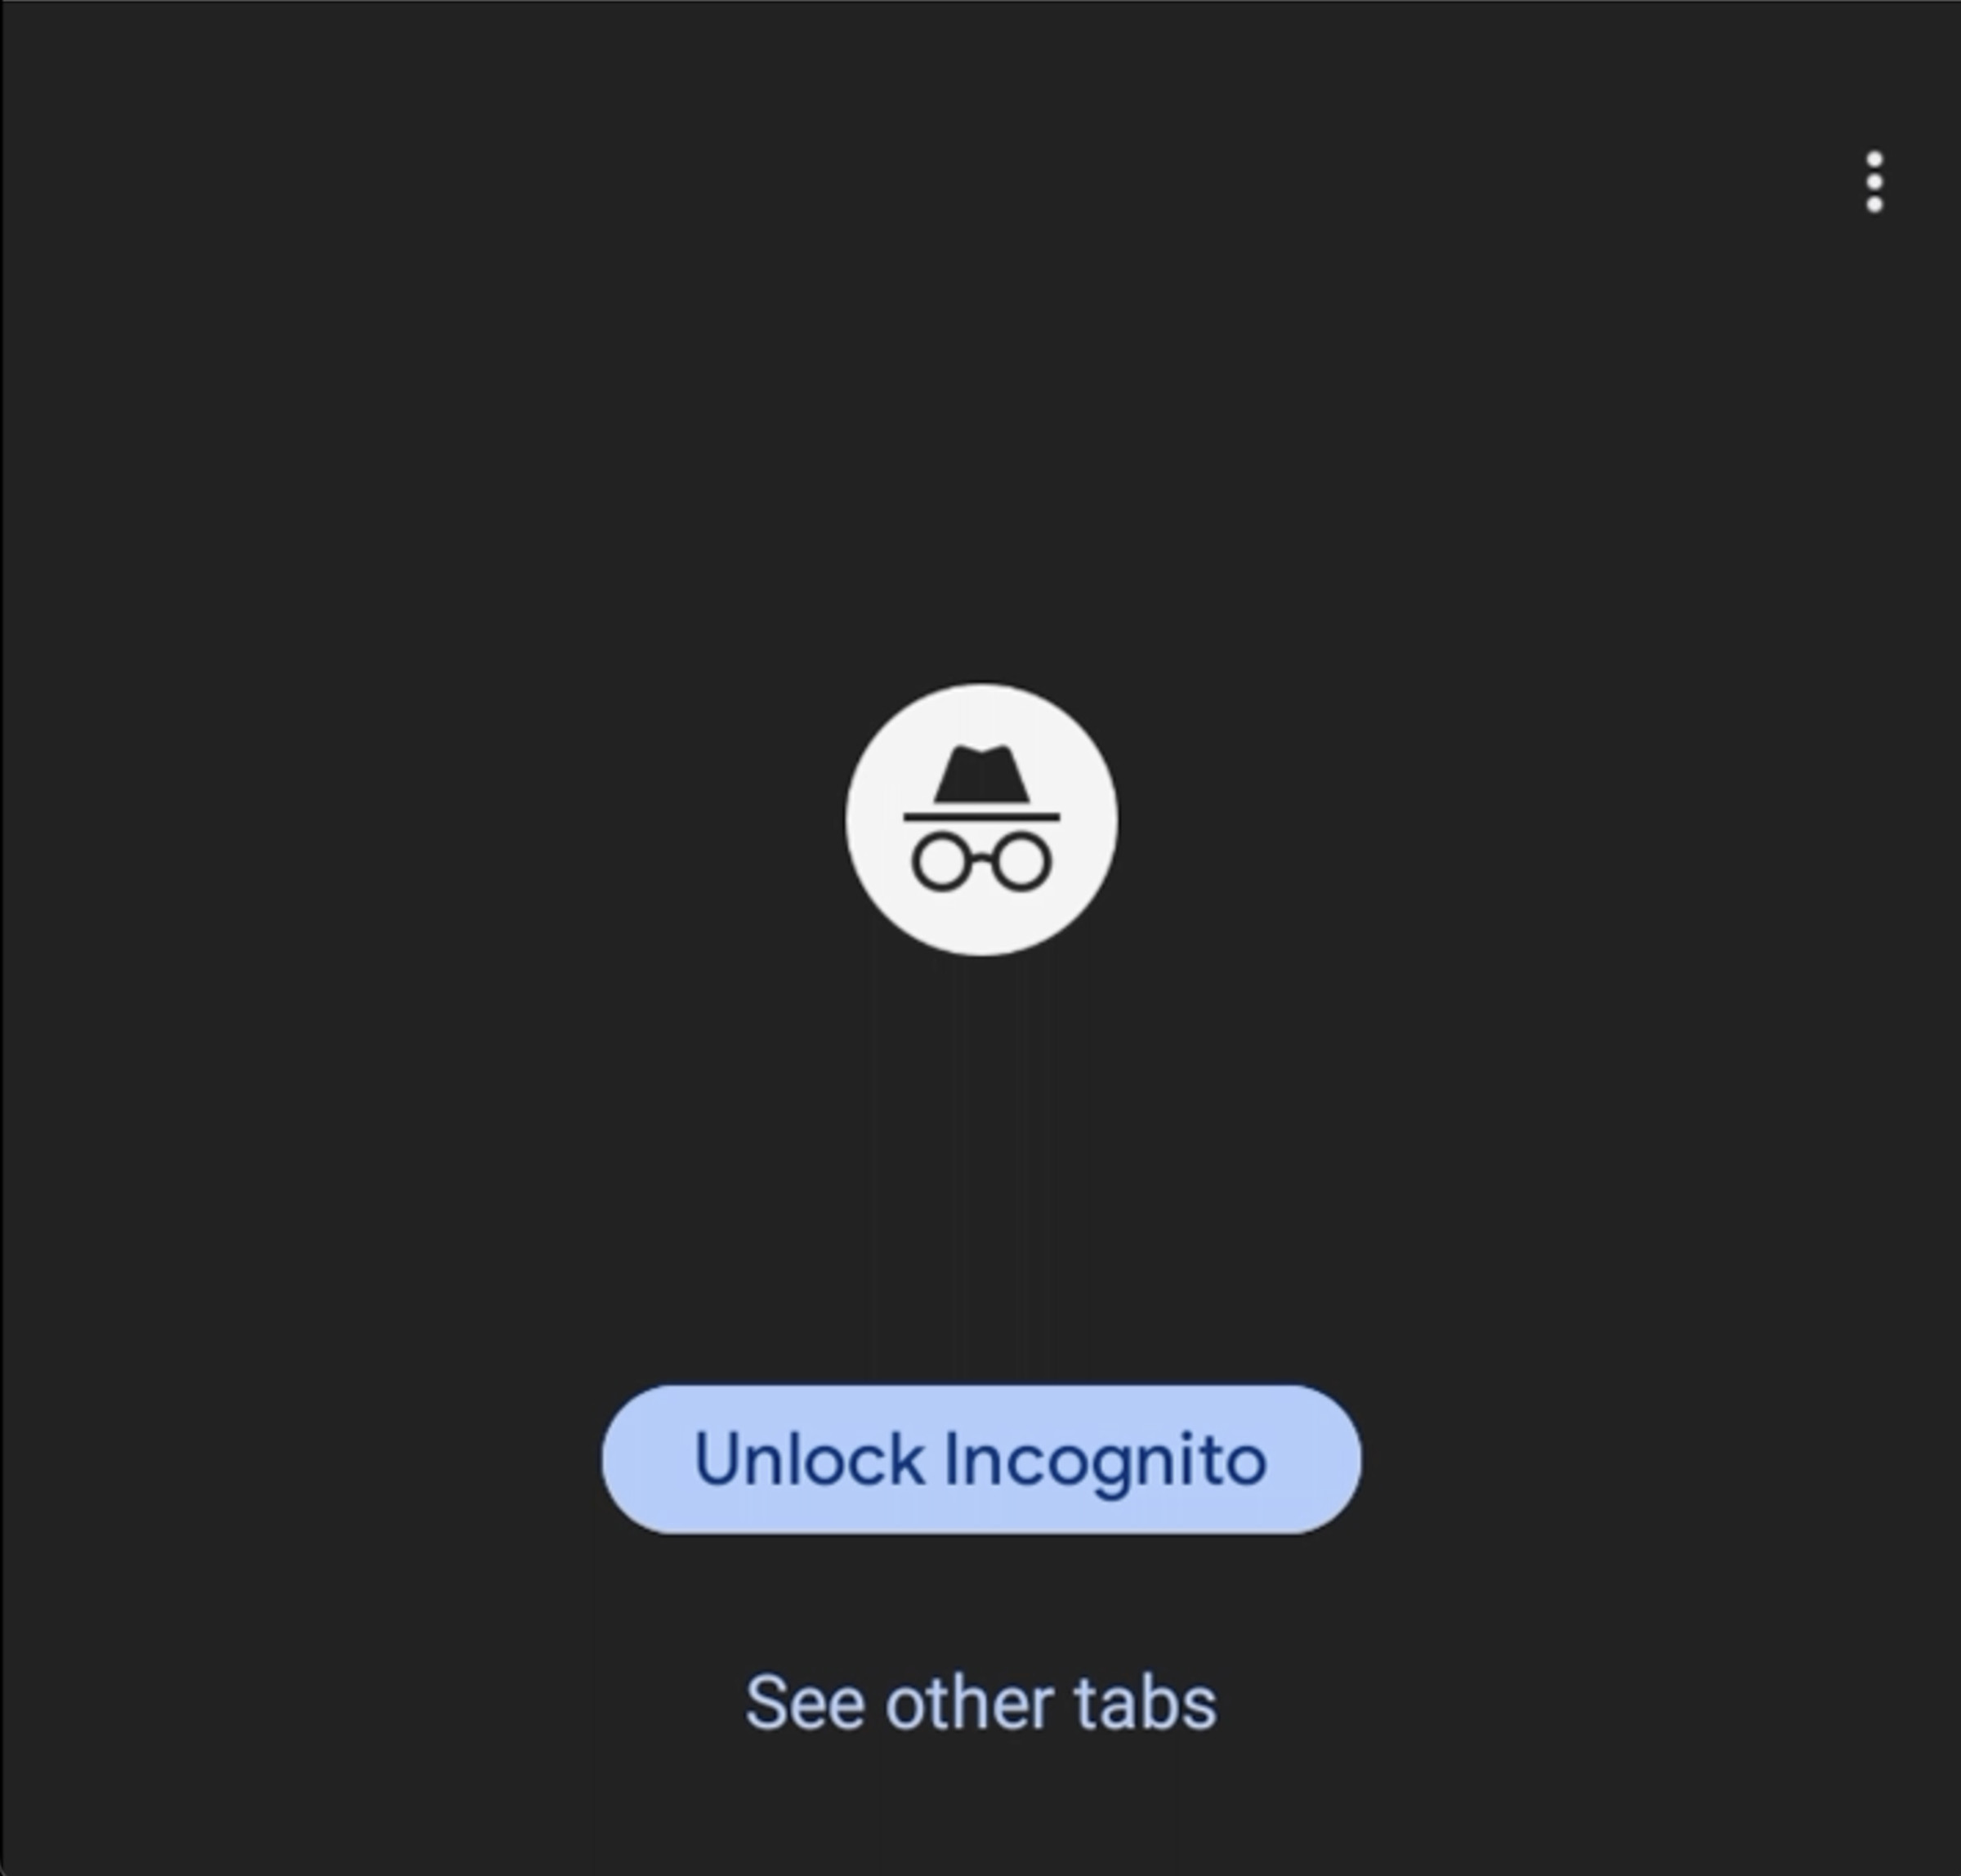 Screenshot of the unlock incognito screen, with a button 